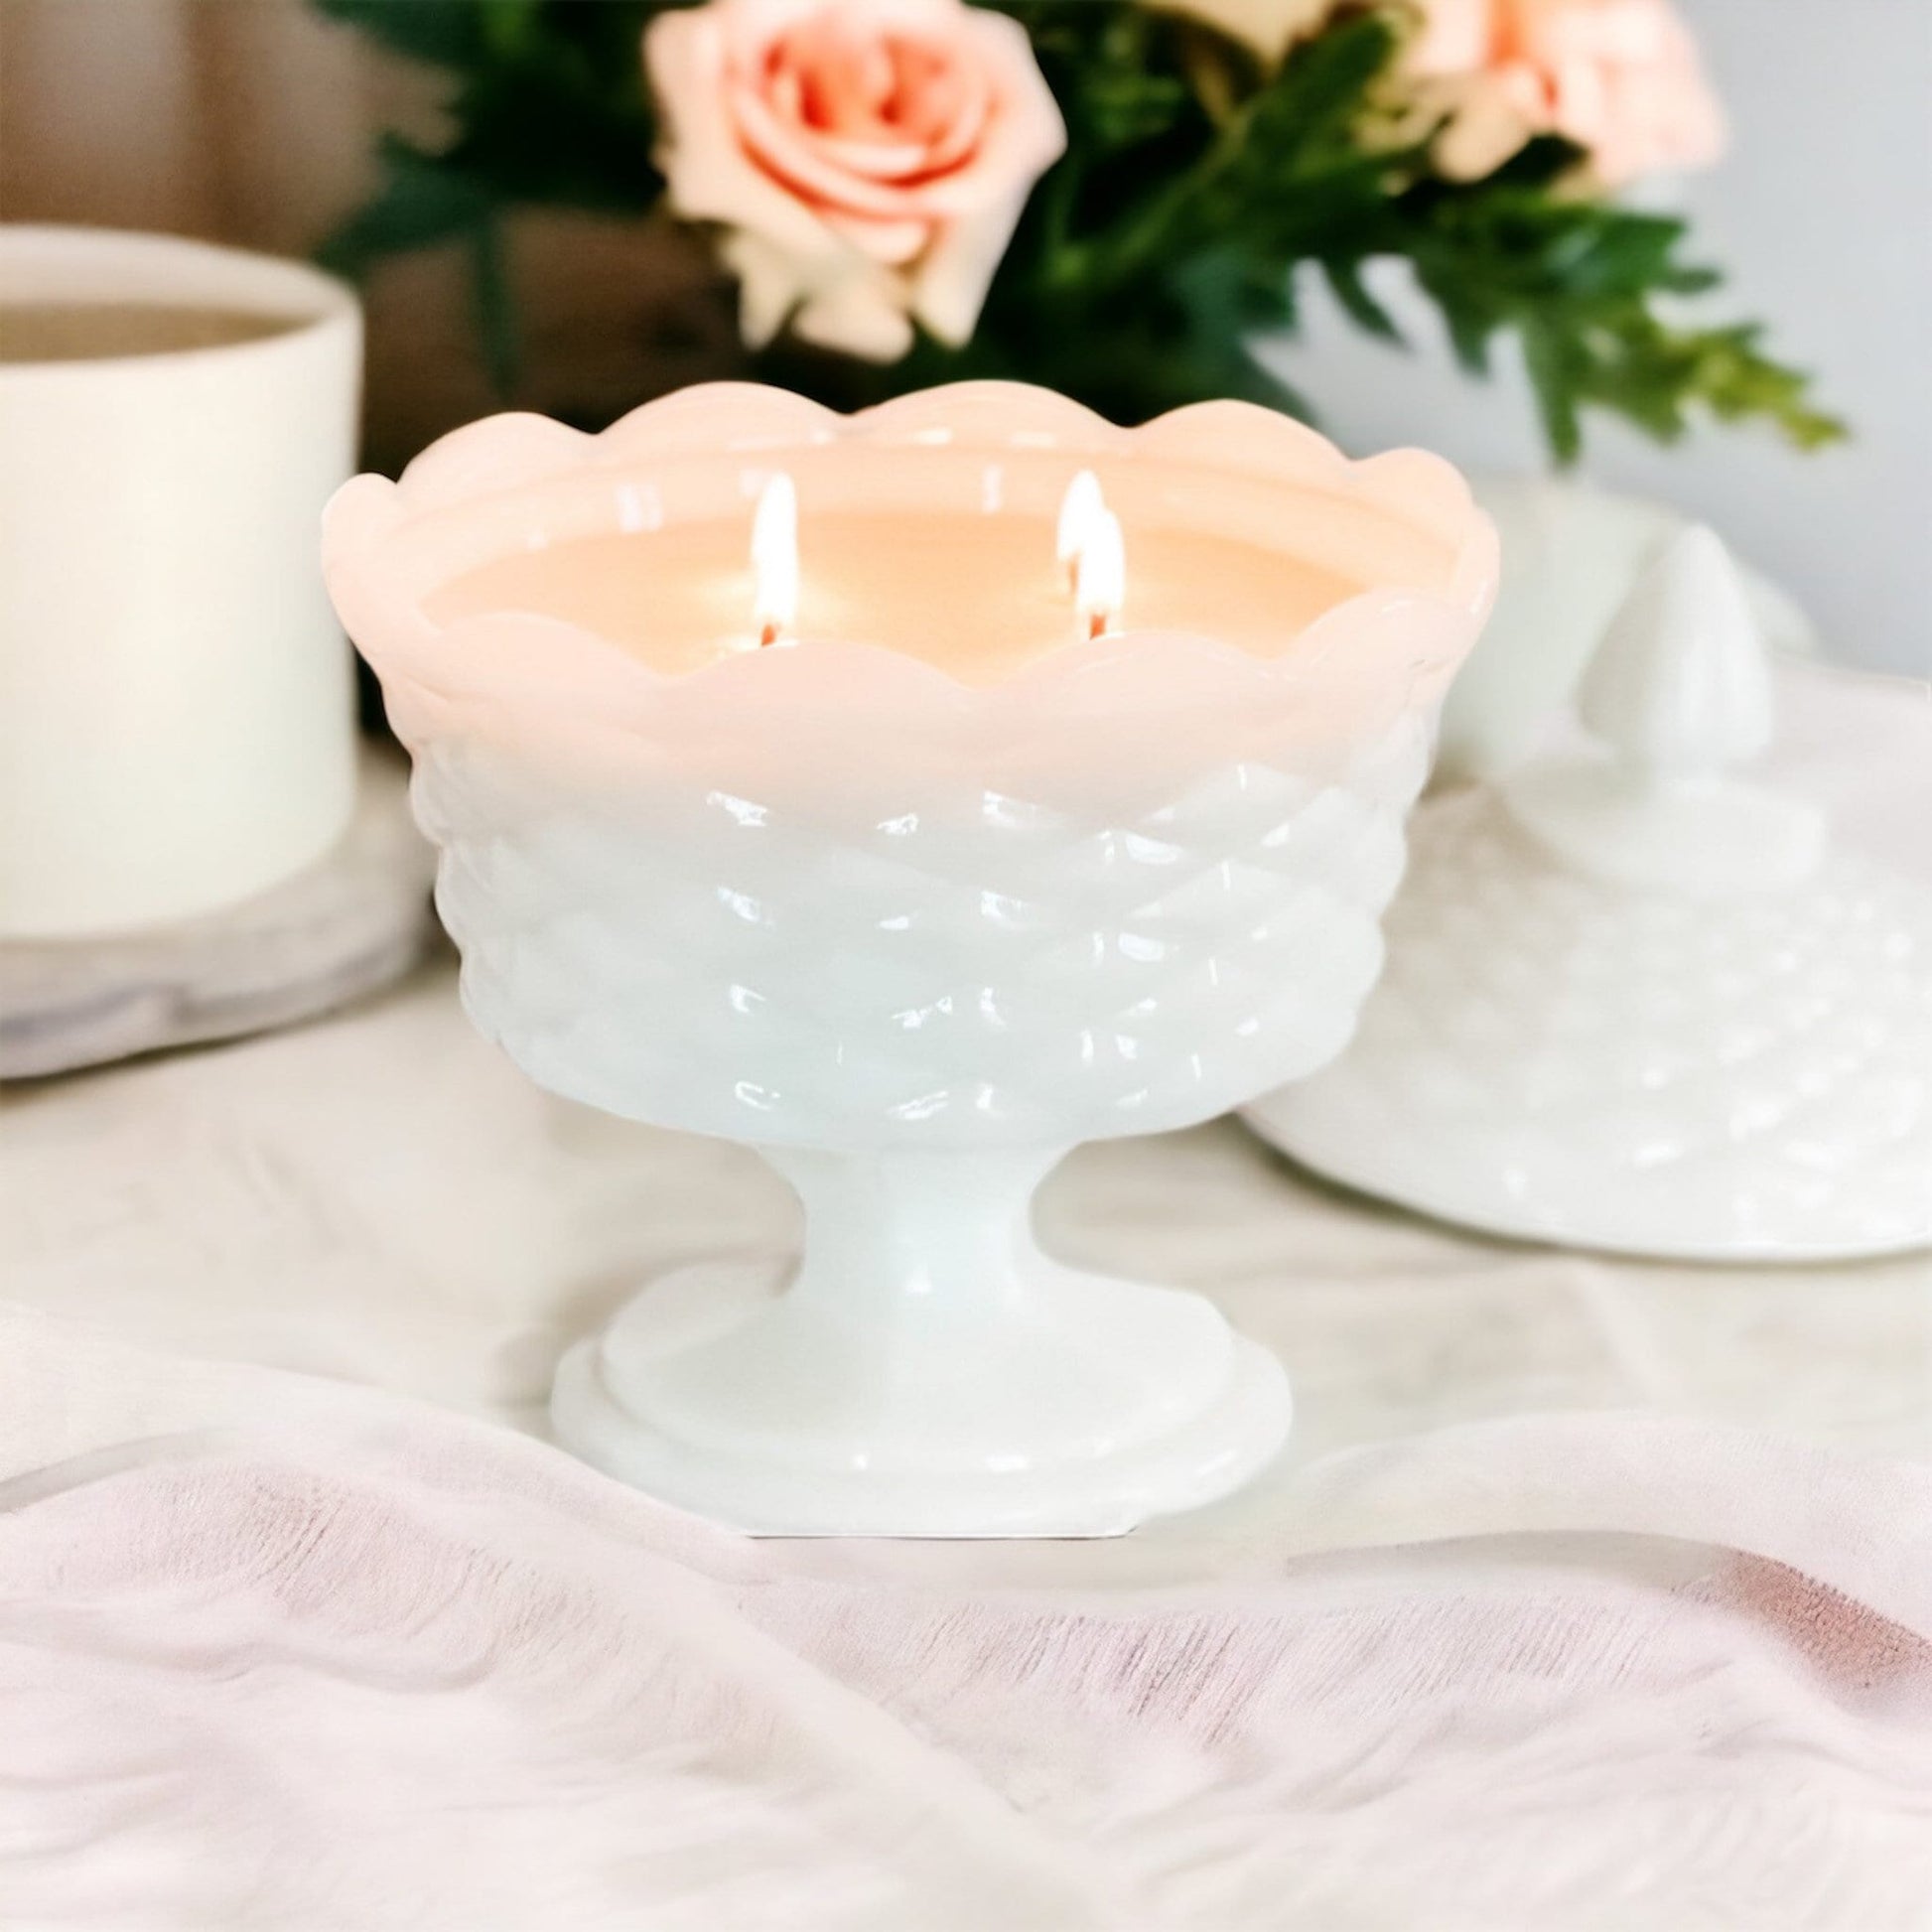 Scented Candles, Milk Glass, Best Friend Gifts, Cottage Decor